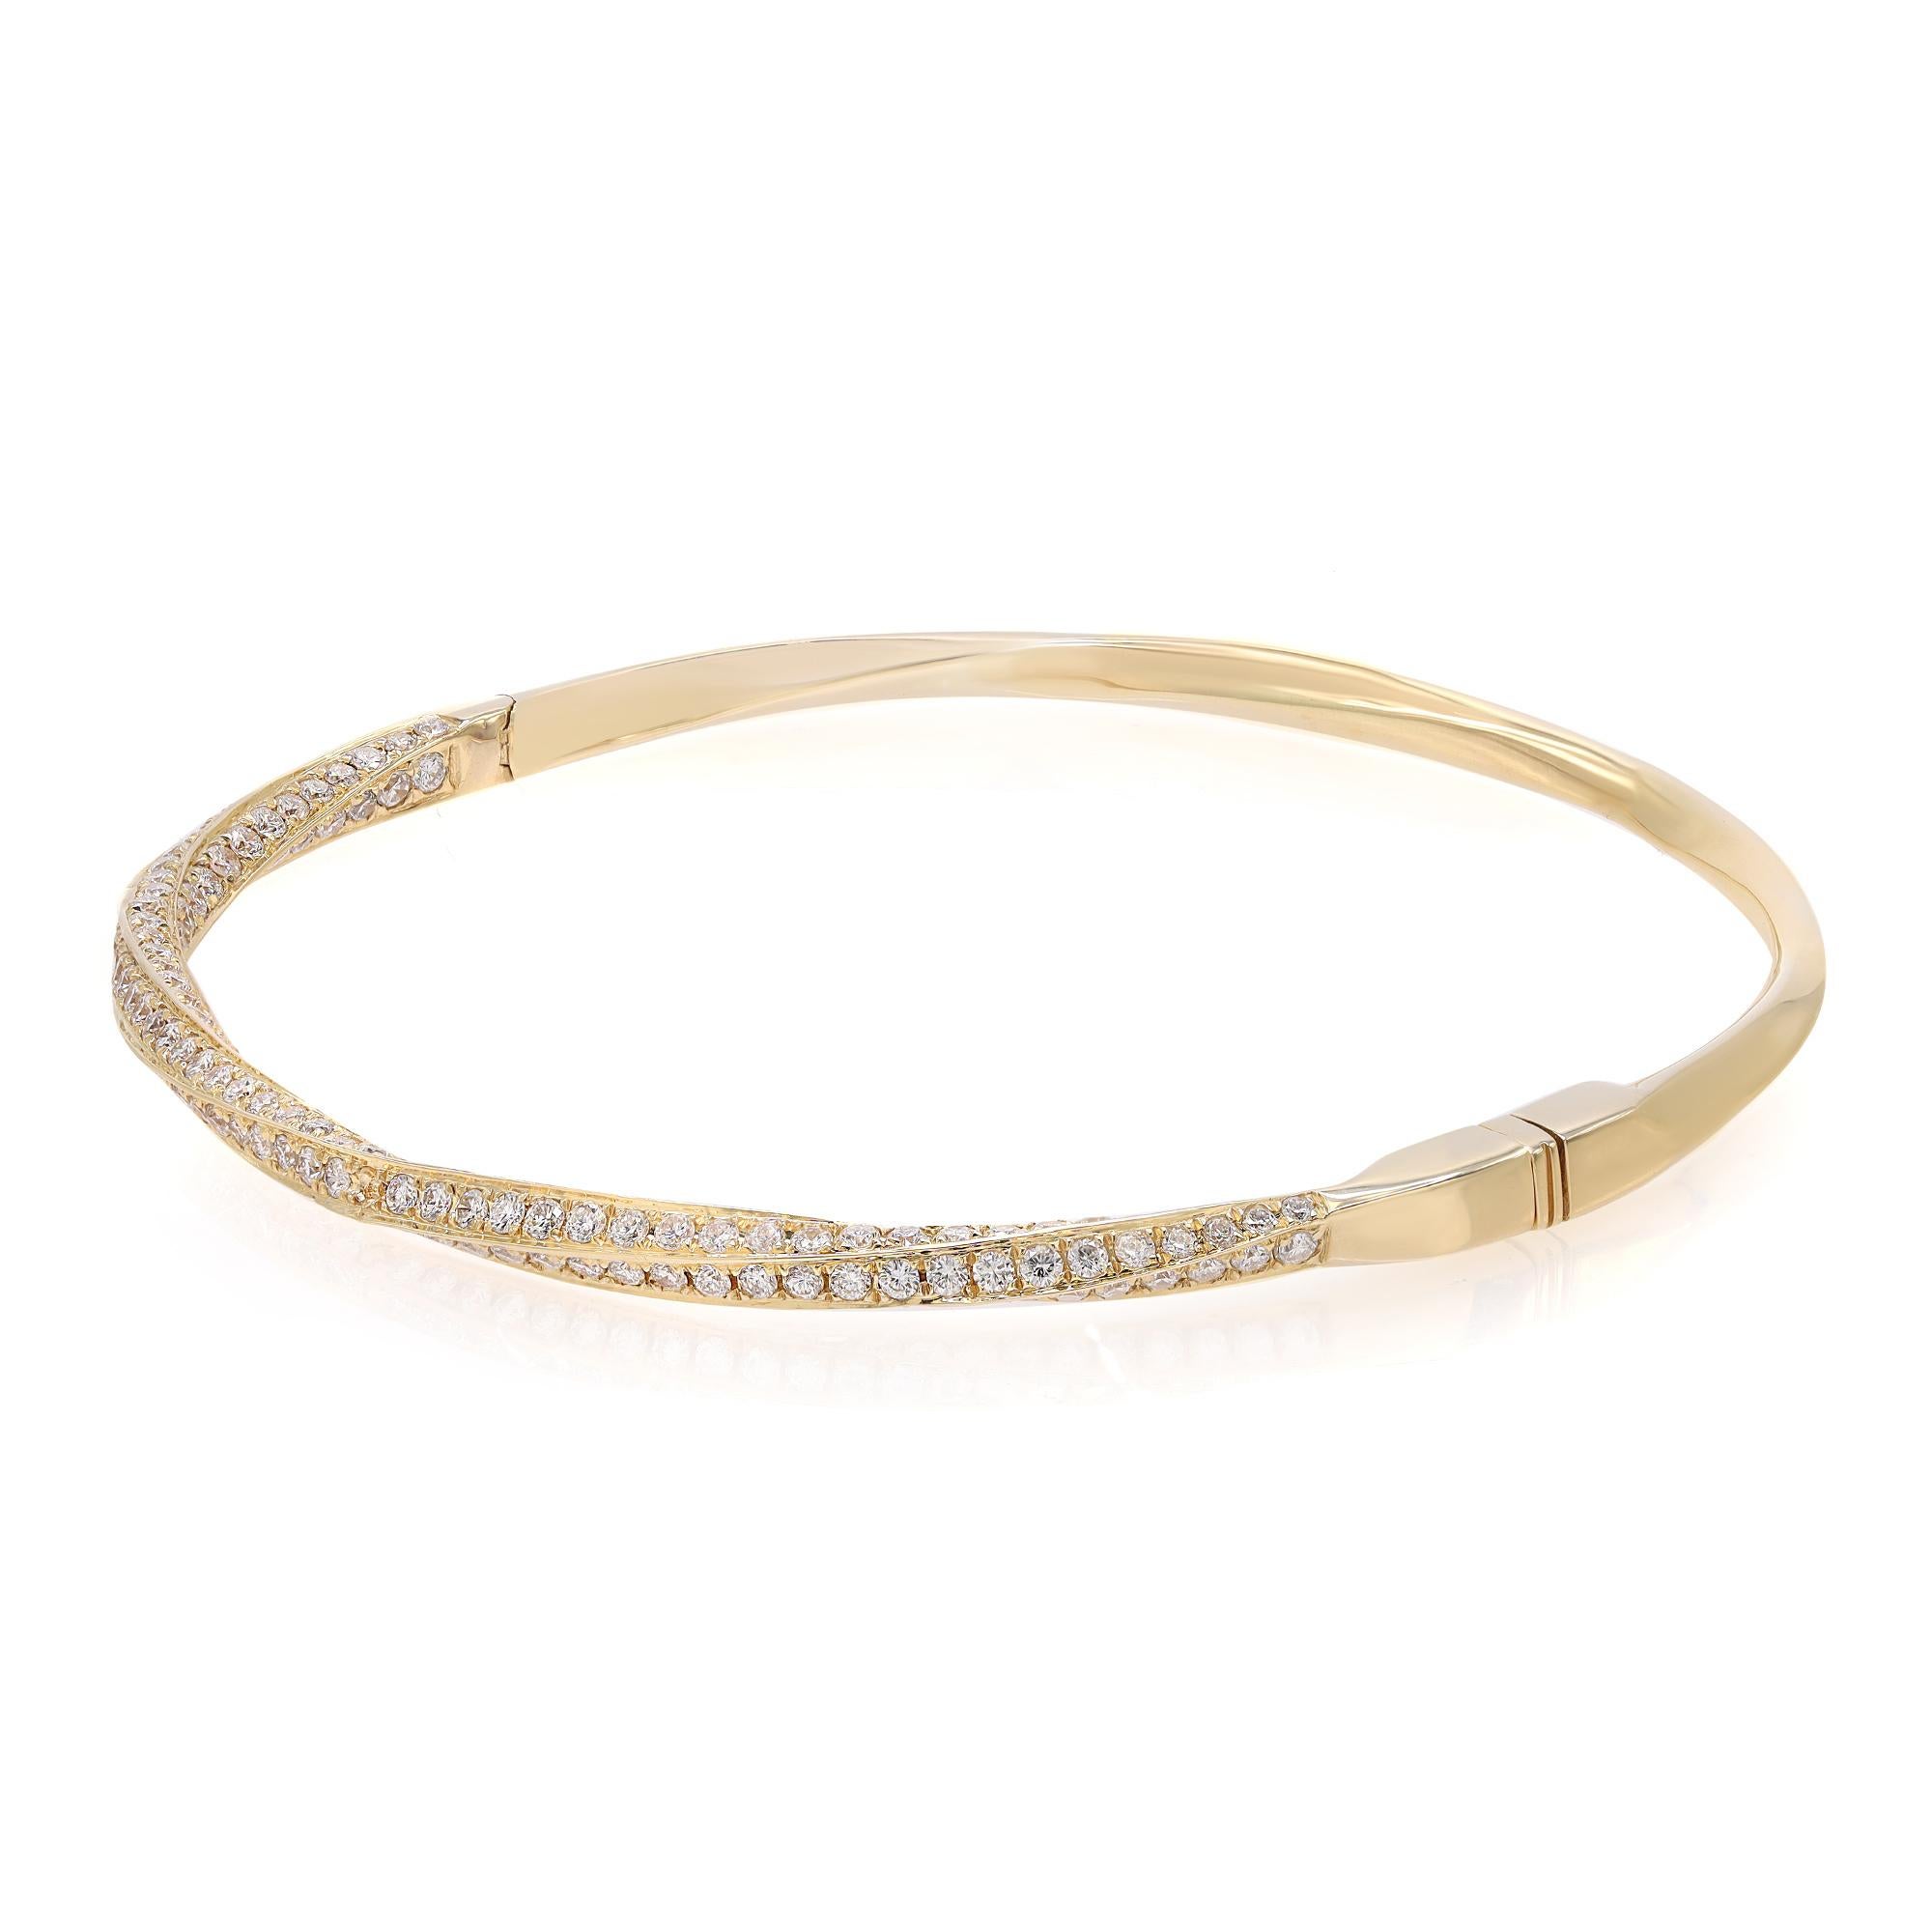 This beautifully crafted bangle bracelet features pave set round brilliant cut diamonds encrusted halfway through the bangle. Crafted in 18k yellow gold. Total diamond weight: 2.05 carats. Diamond Quality: F-G color and SI clarity. Wrist size: 6.5